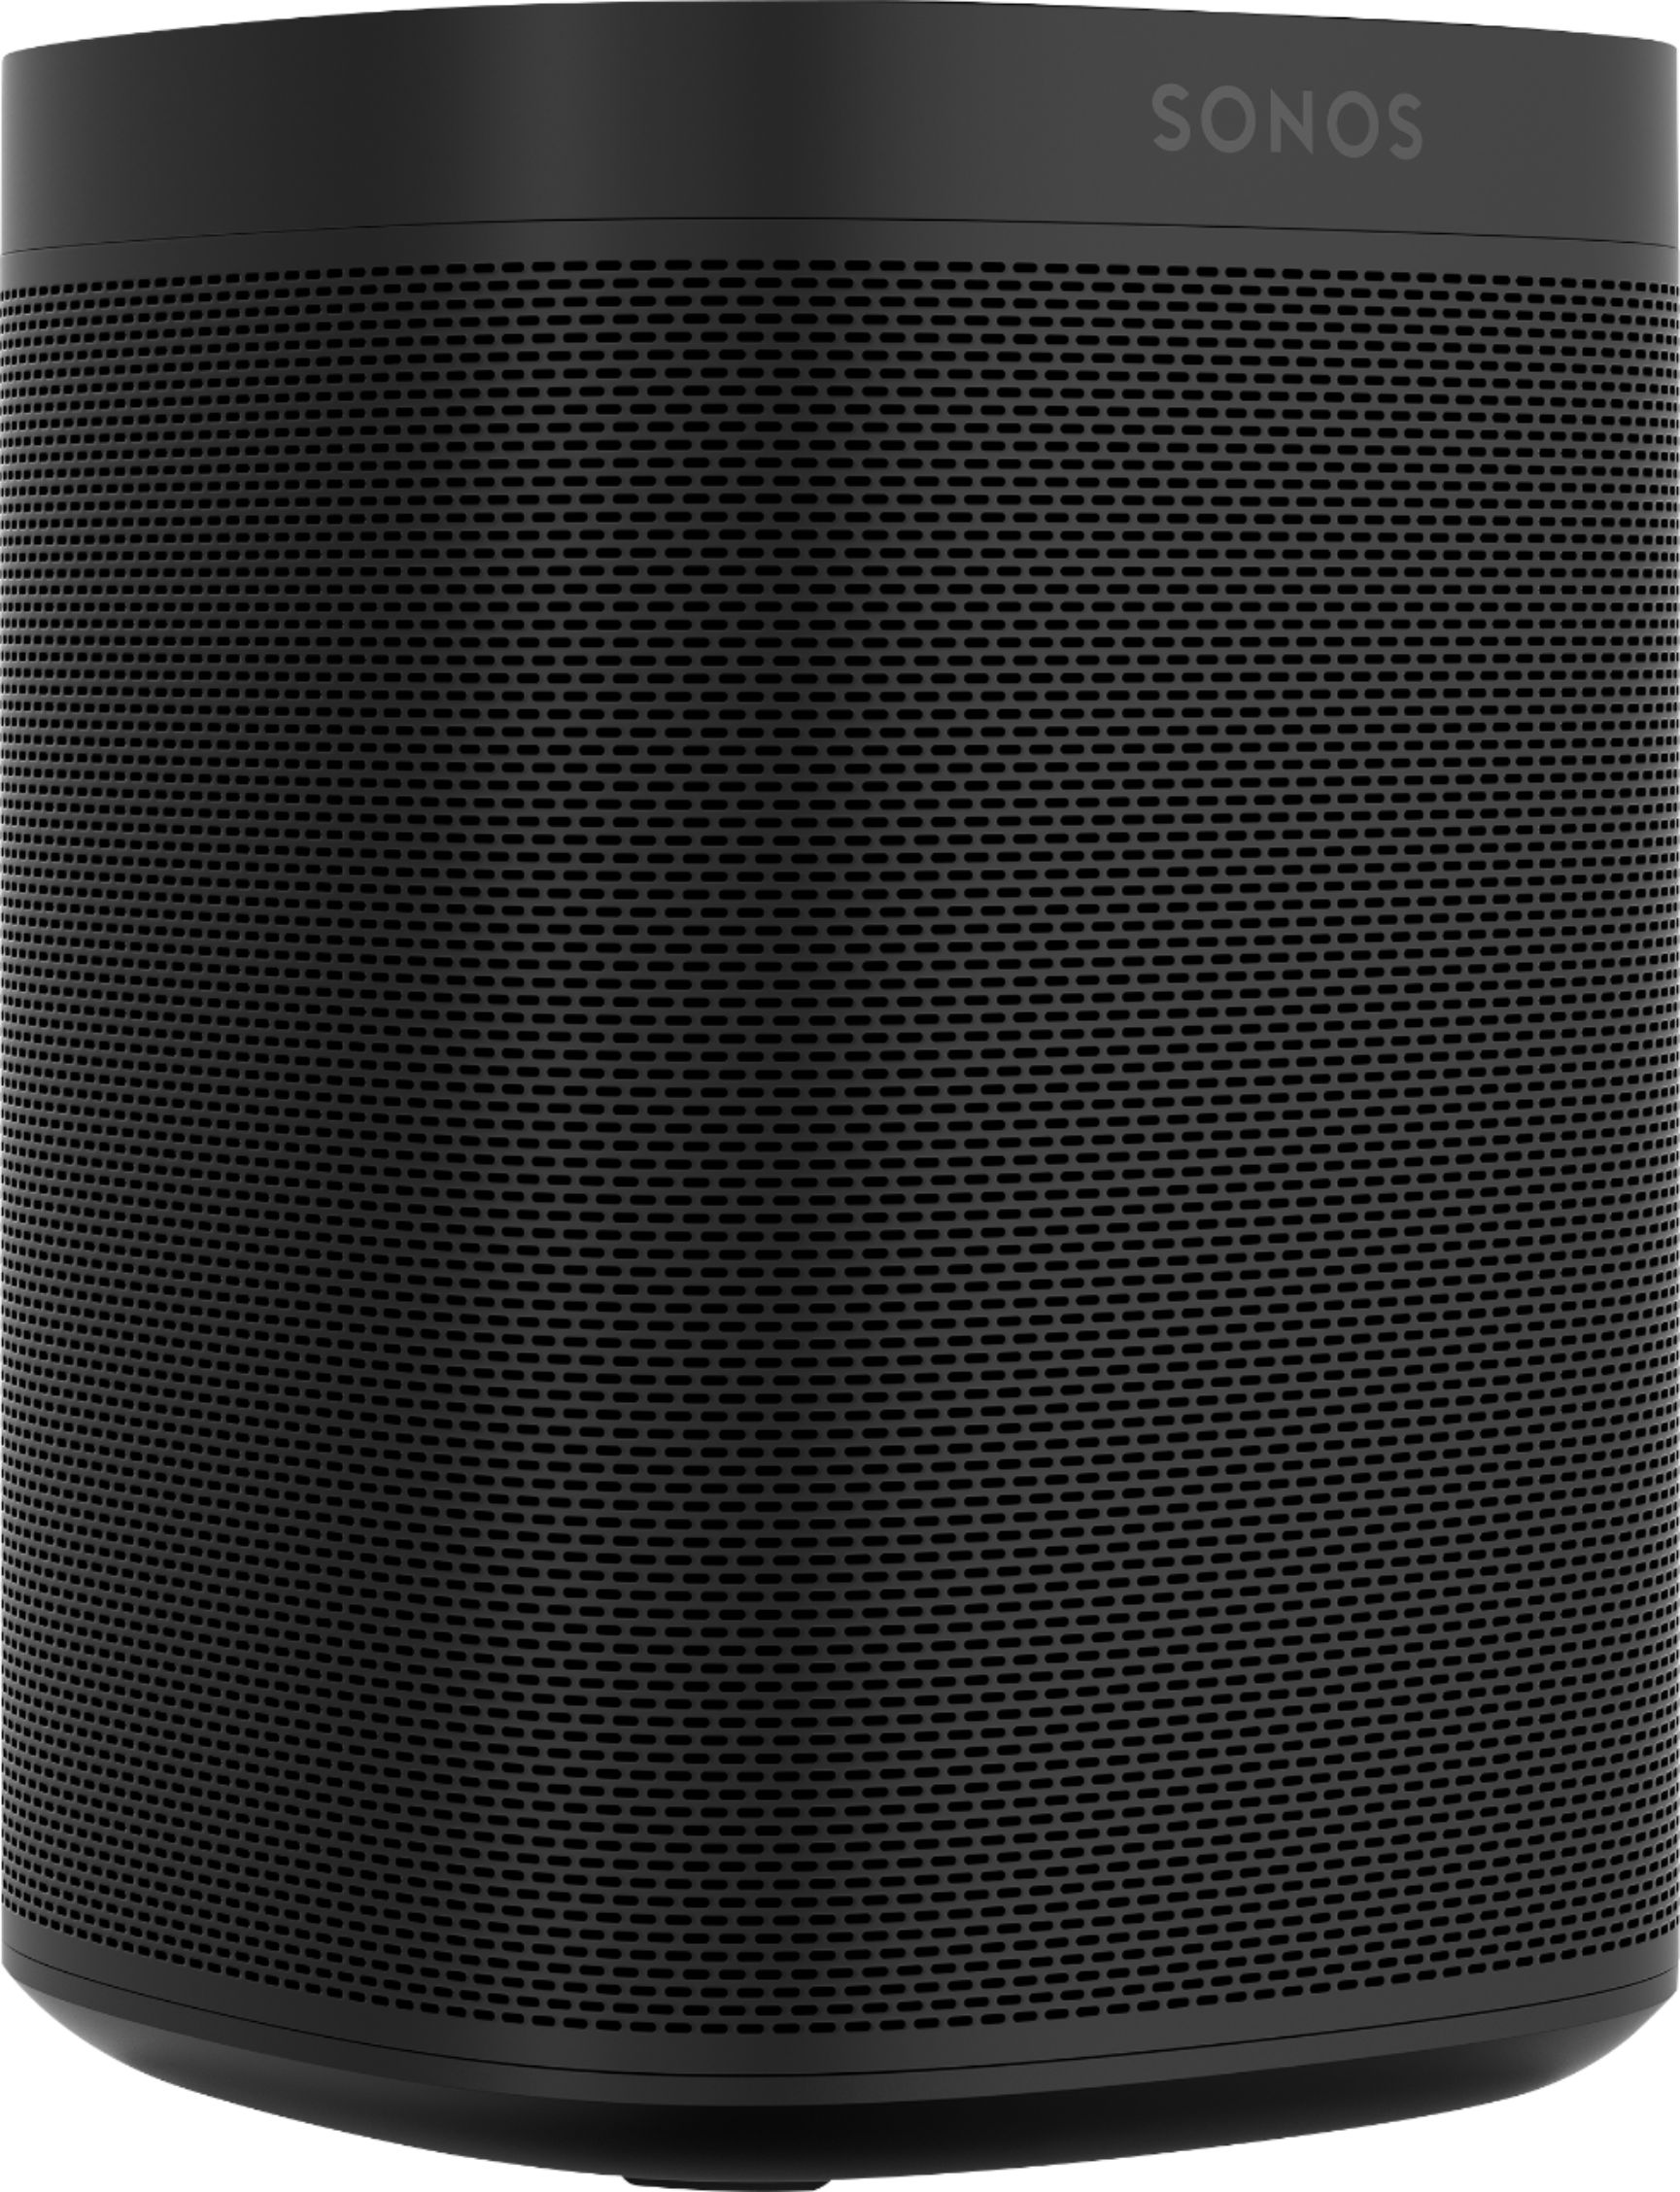 Angle View: Sonos - Geek Squad Certified Refurbished One (Gen2) Wireless Smart Speaker with Amazon Alexa Voice Assistant - Black